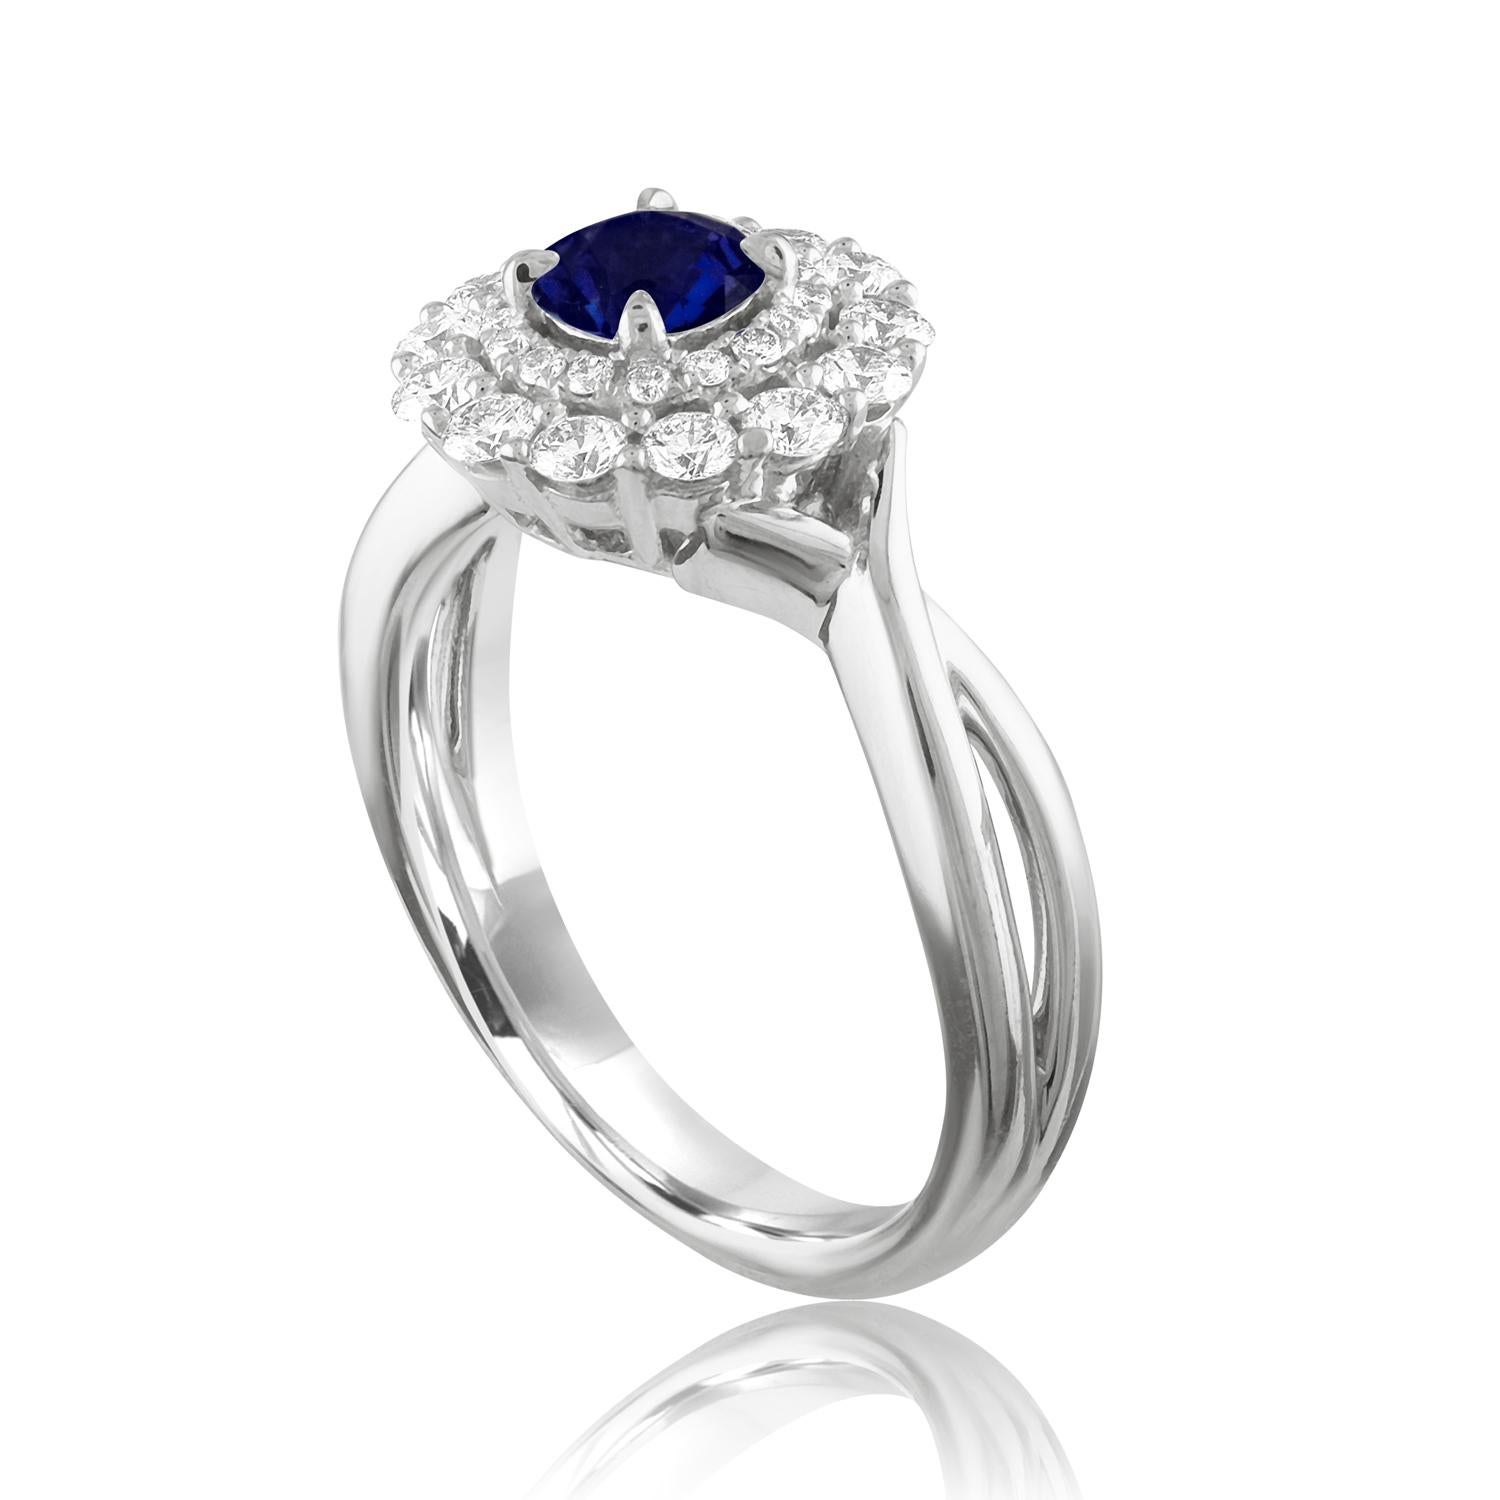 Beautiful Double Halo Ring
The ring is 18K White Gold
The Center Stone is a Round Blue Sapphire 0.84 Carats
The Sapphire is AGL Certified Heated
There are 0.52 Carats in Diamonds F/G VS/SI
The ring is a size 6.5, sizable.
The ring weighs 6.0 grams